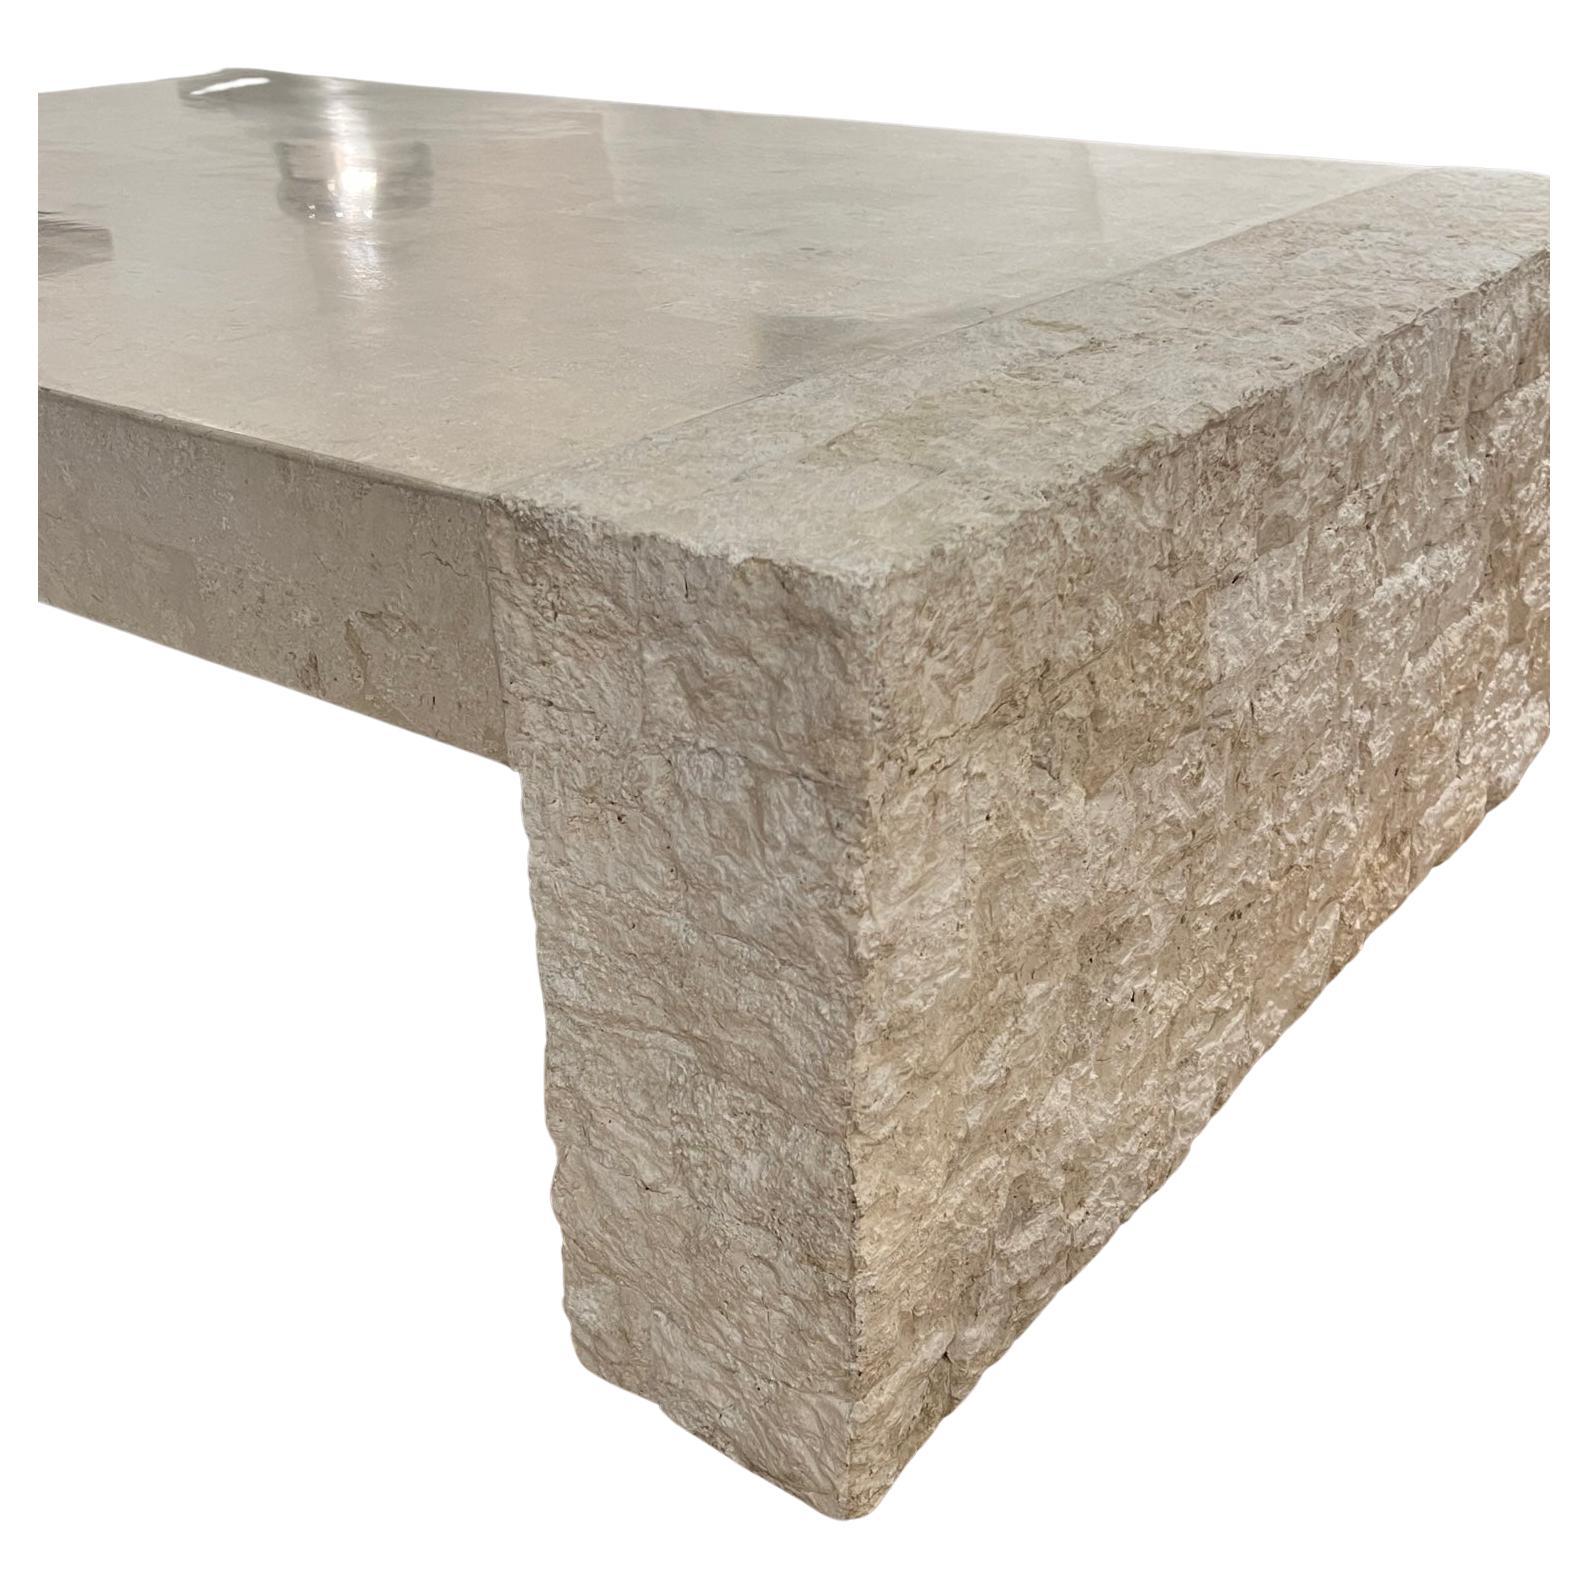 Tessellated Stone Table For Sale